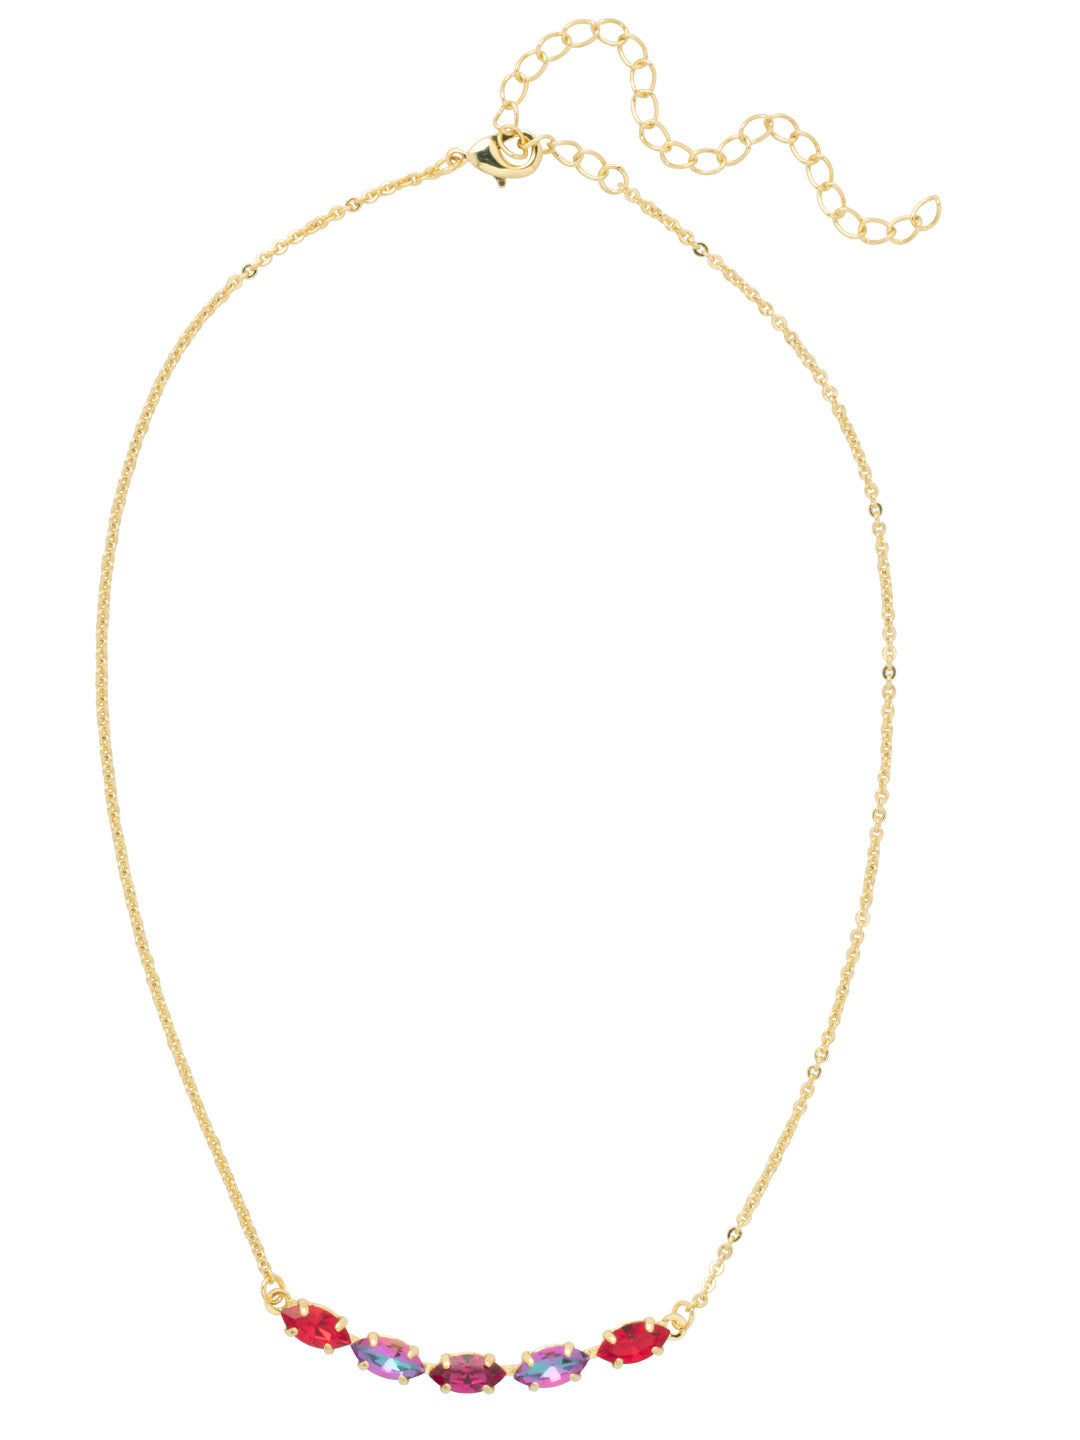 Product Image: Clarissa Repeating Tennis Necklace